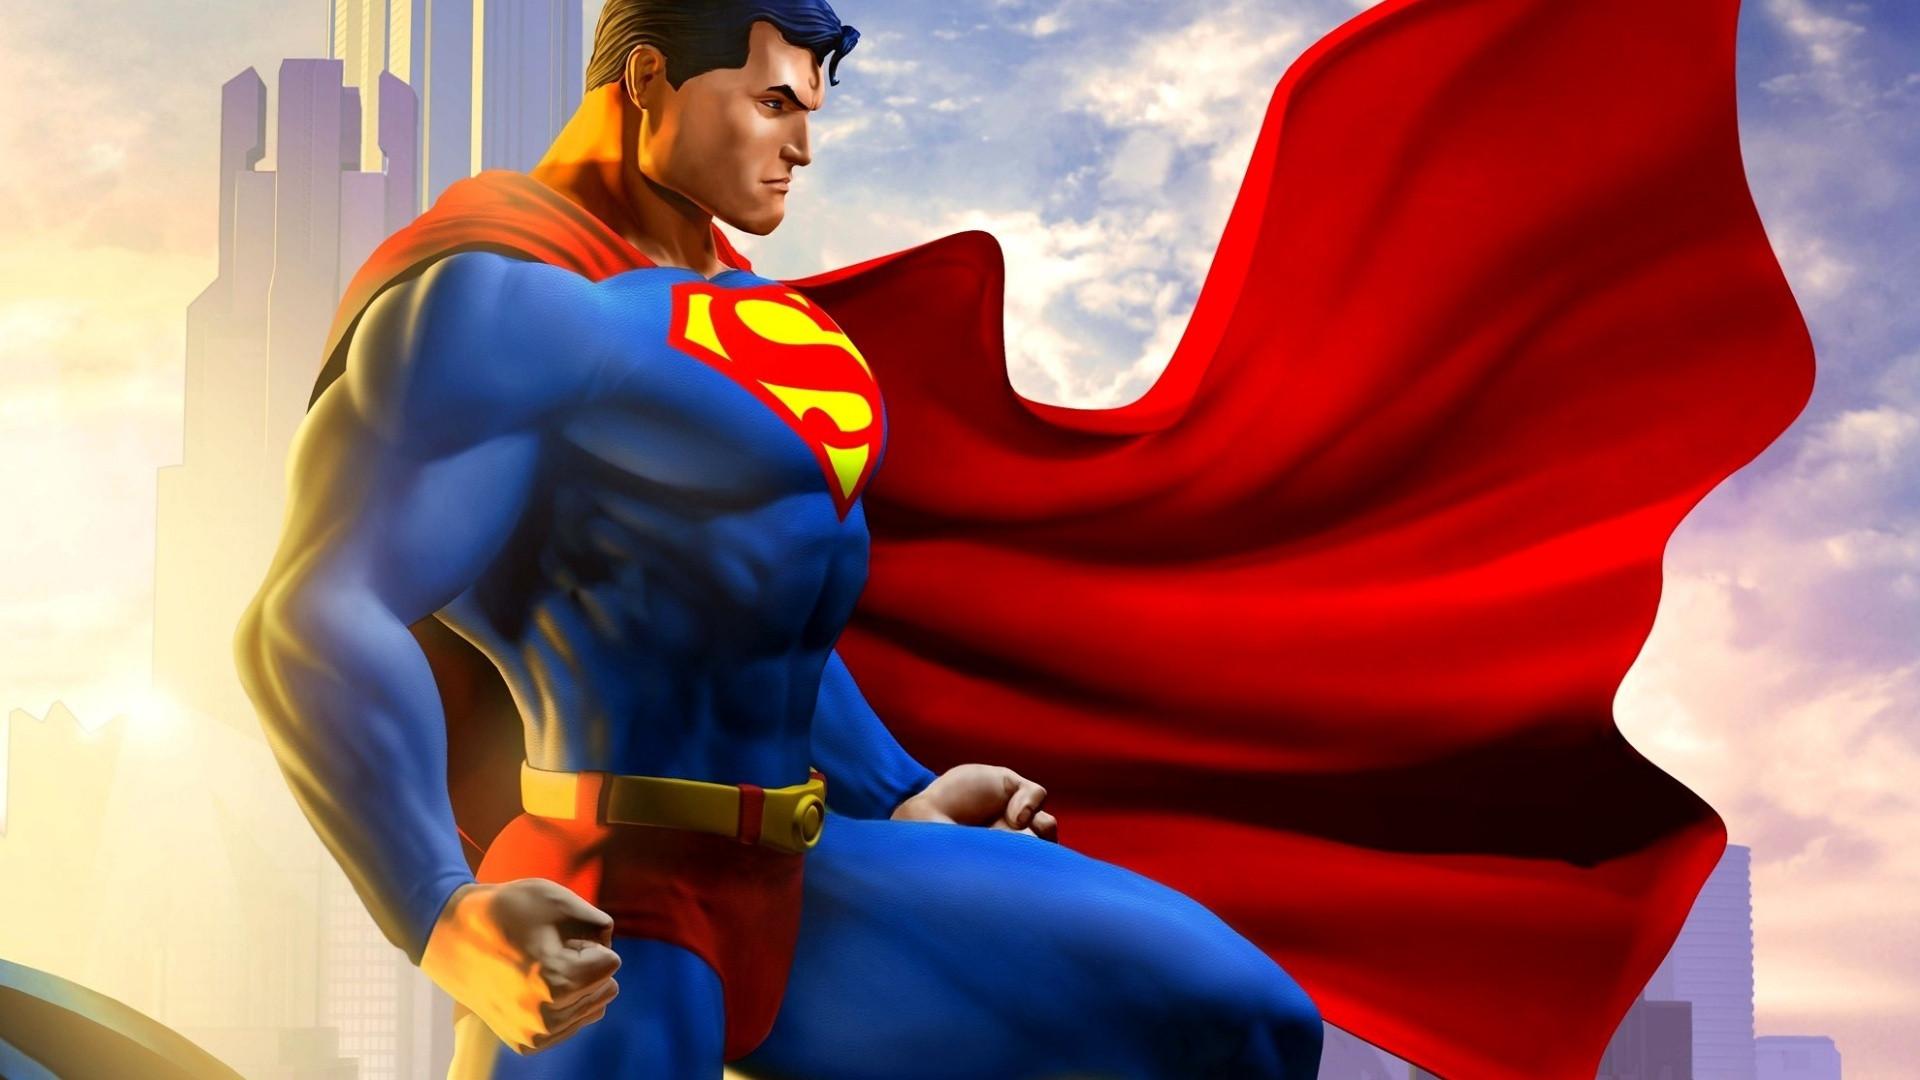 Superman Hd Wallpapers Superman Movie Wallpapers Cool Wallpapers HD